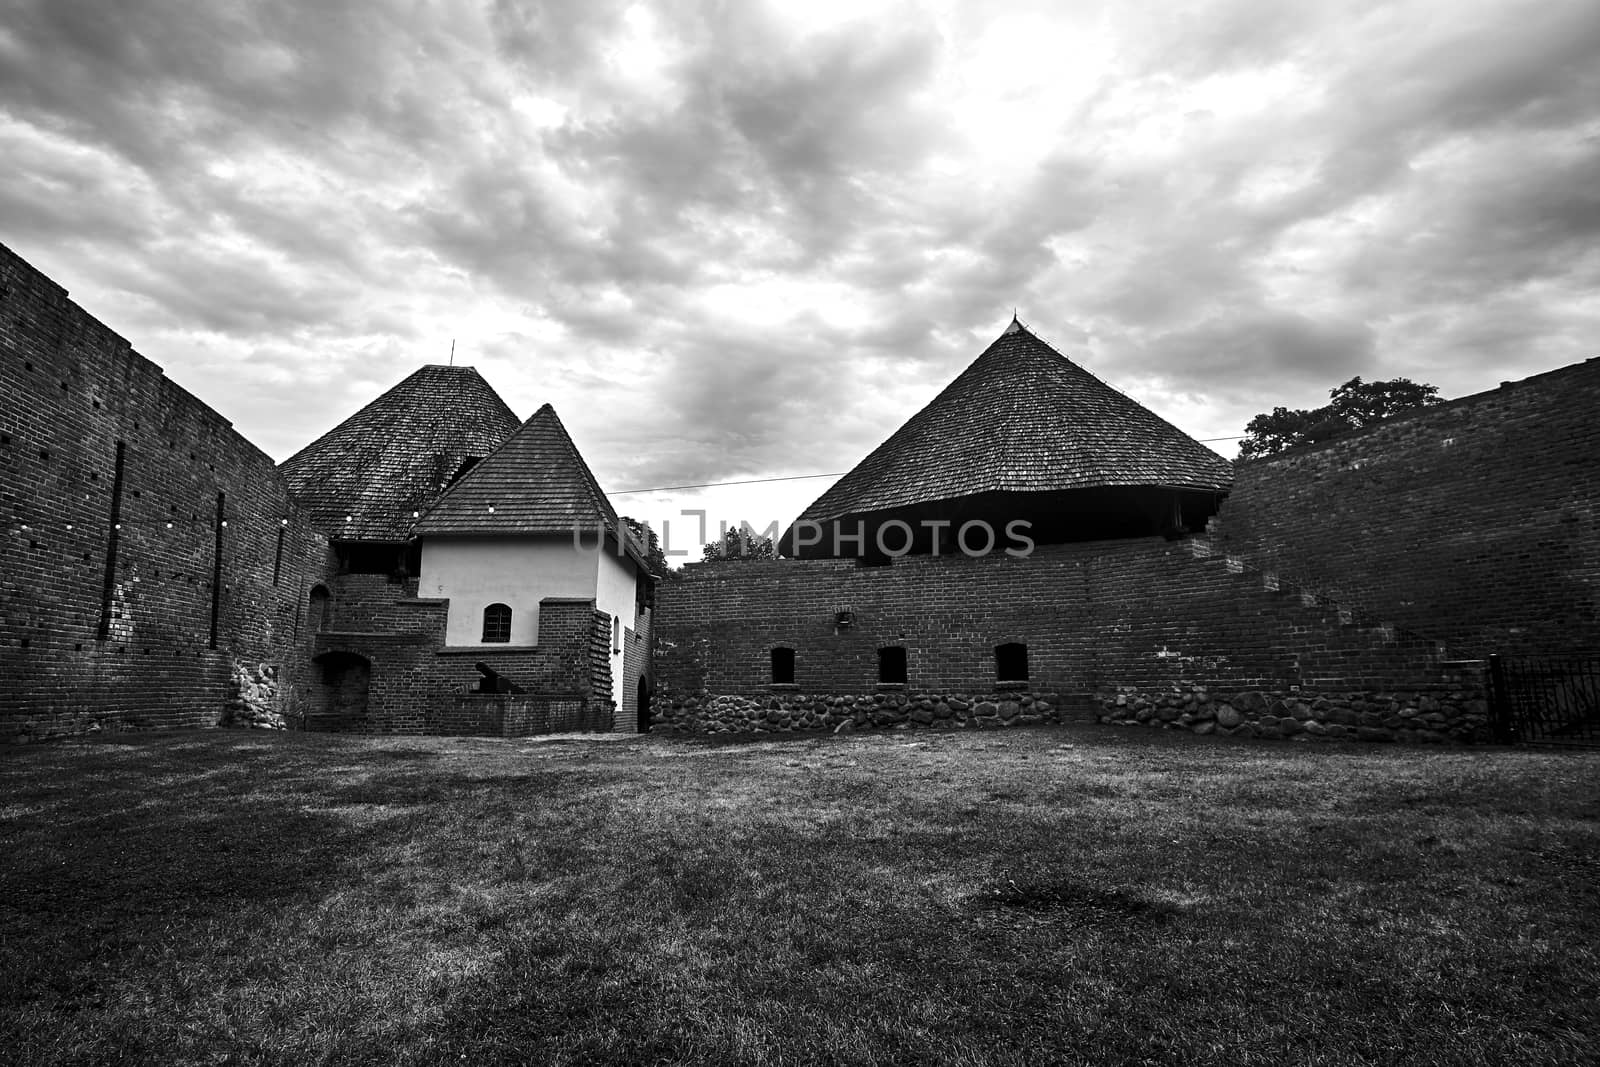 Ruins of walls of a medieval defensive castle in the city of Miedzyrzecz in Poland, monochrome